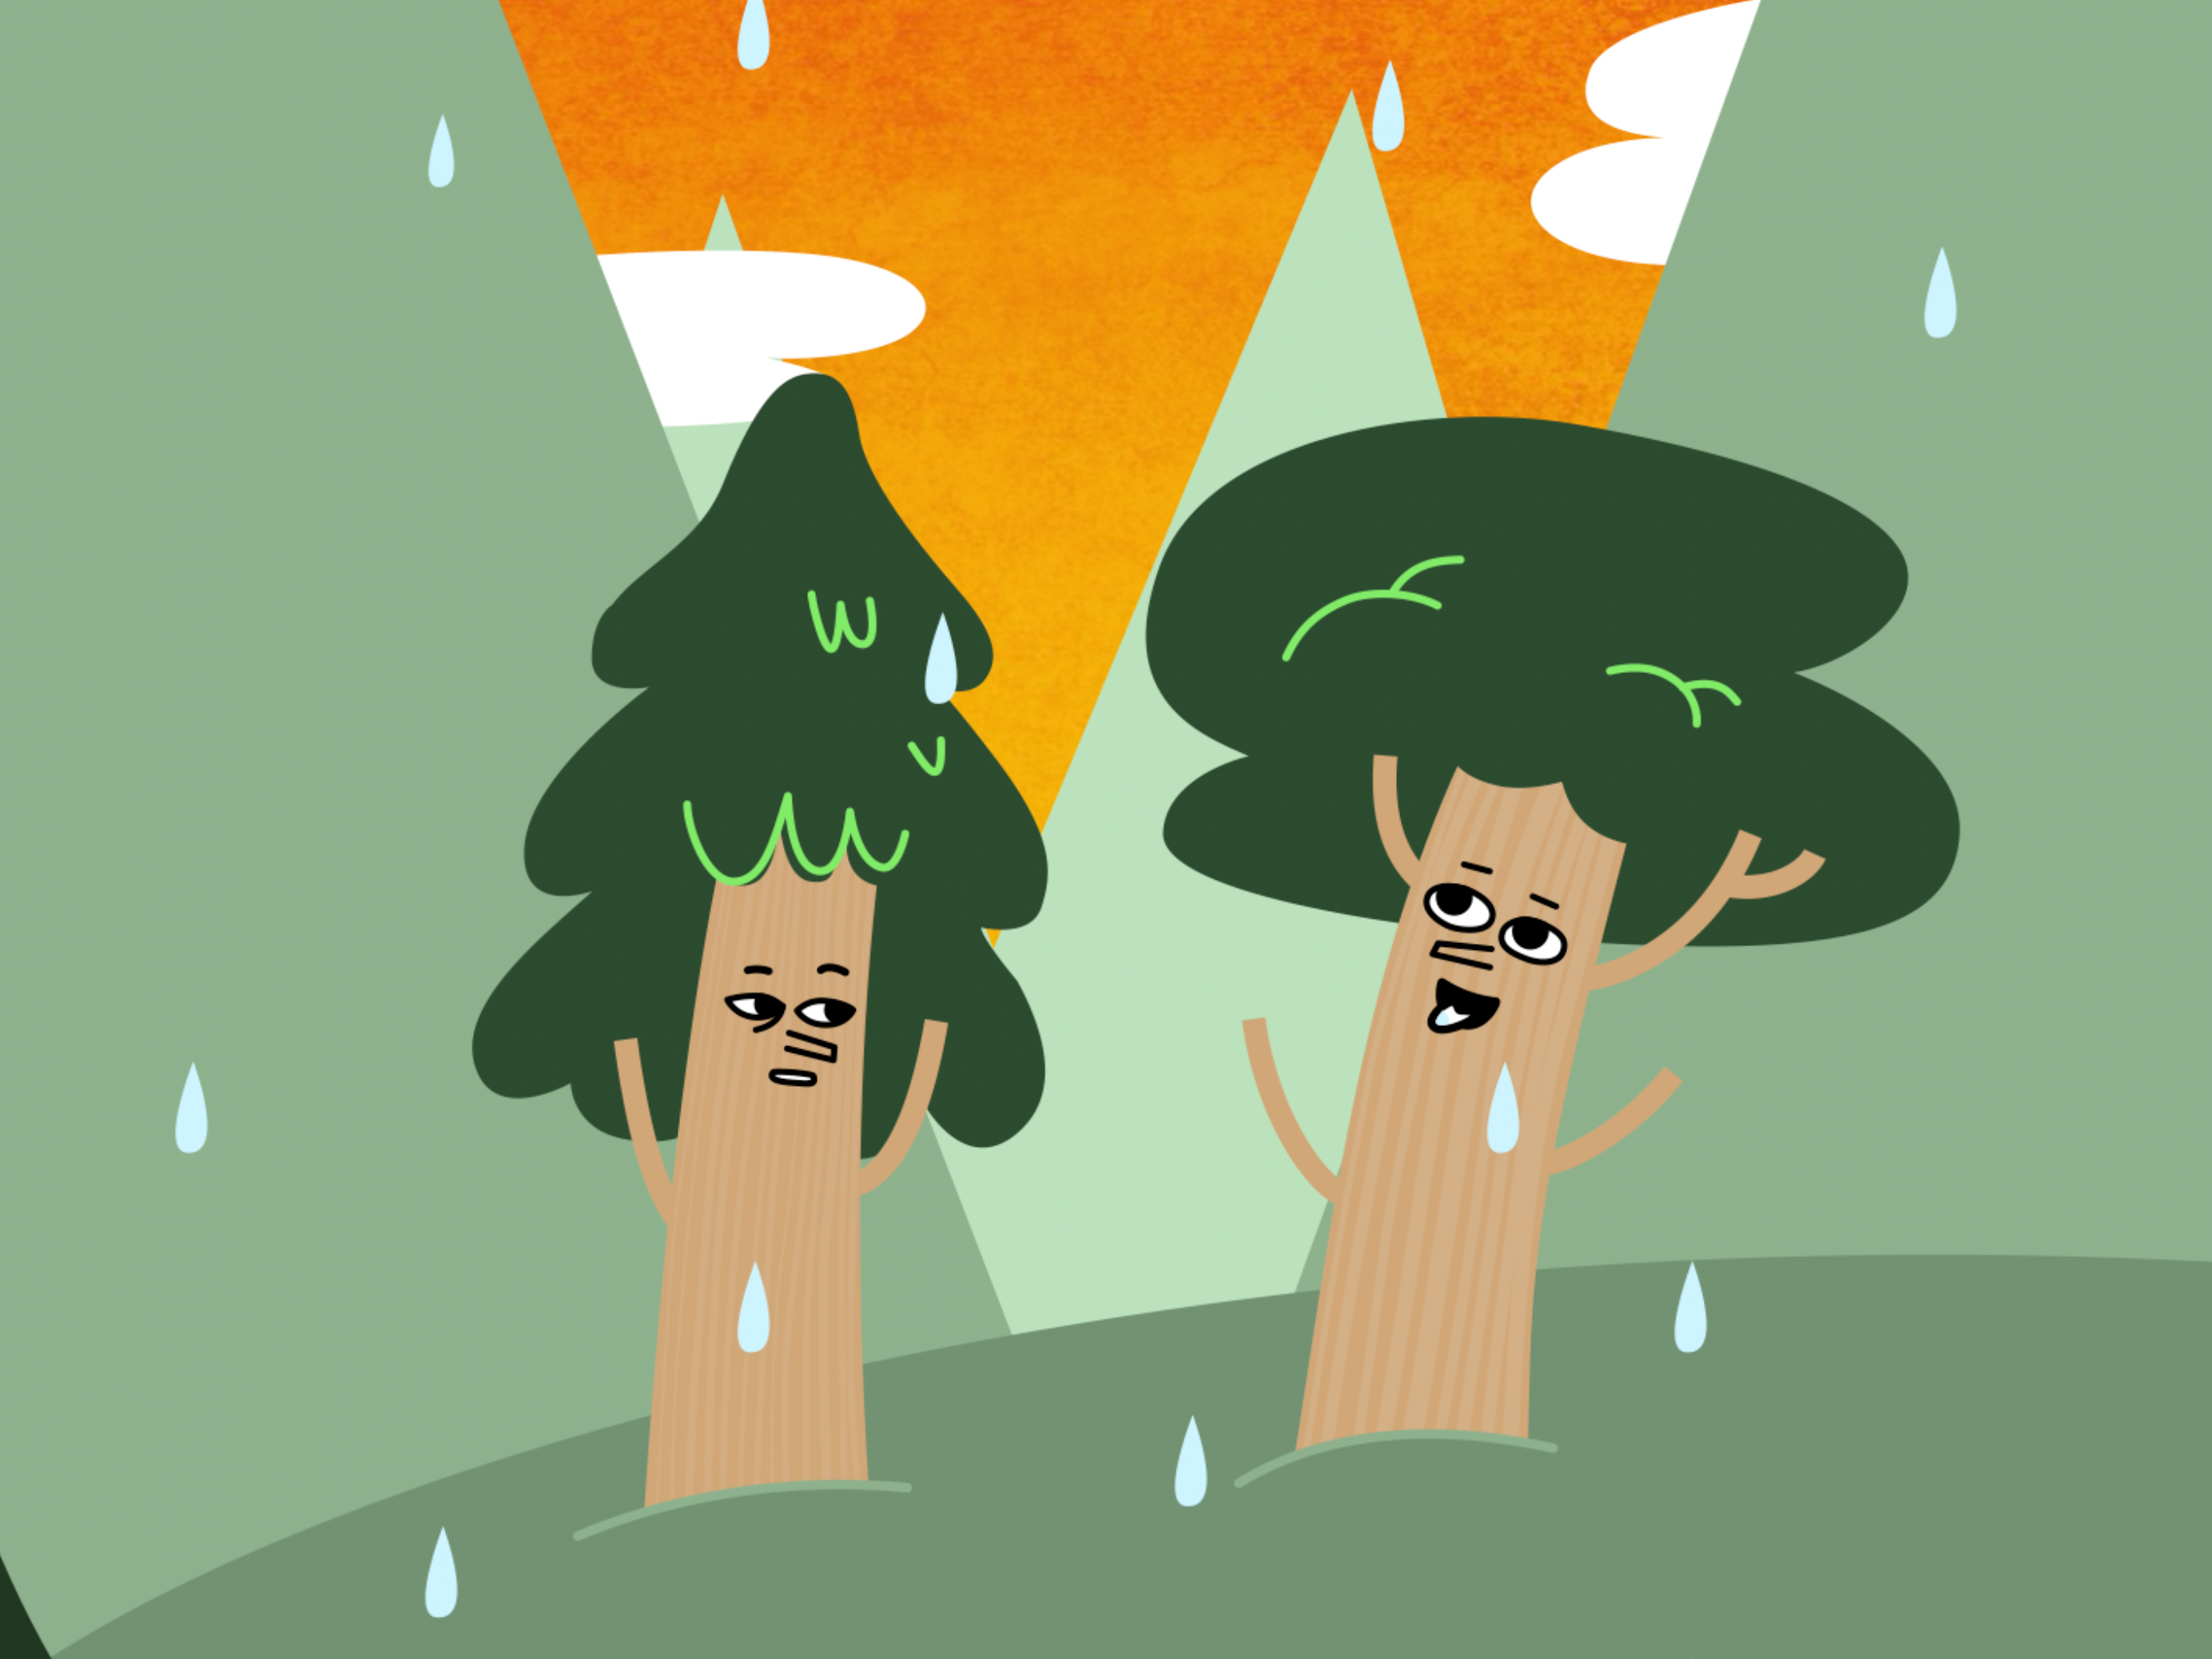 Image of an illustration from BLISH of two trees with smiling faces in front of a hilly landscape.